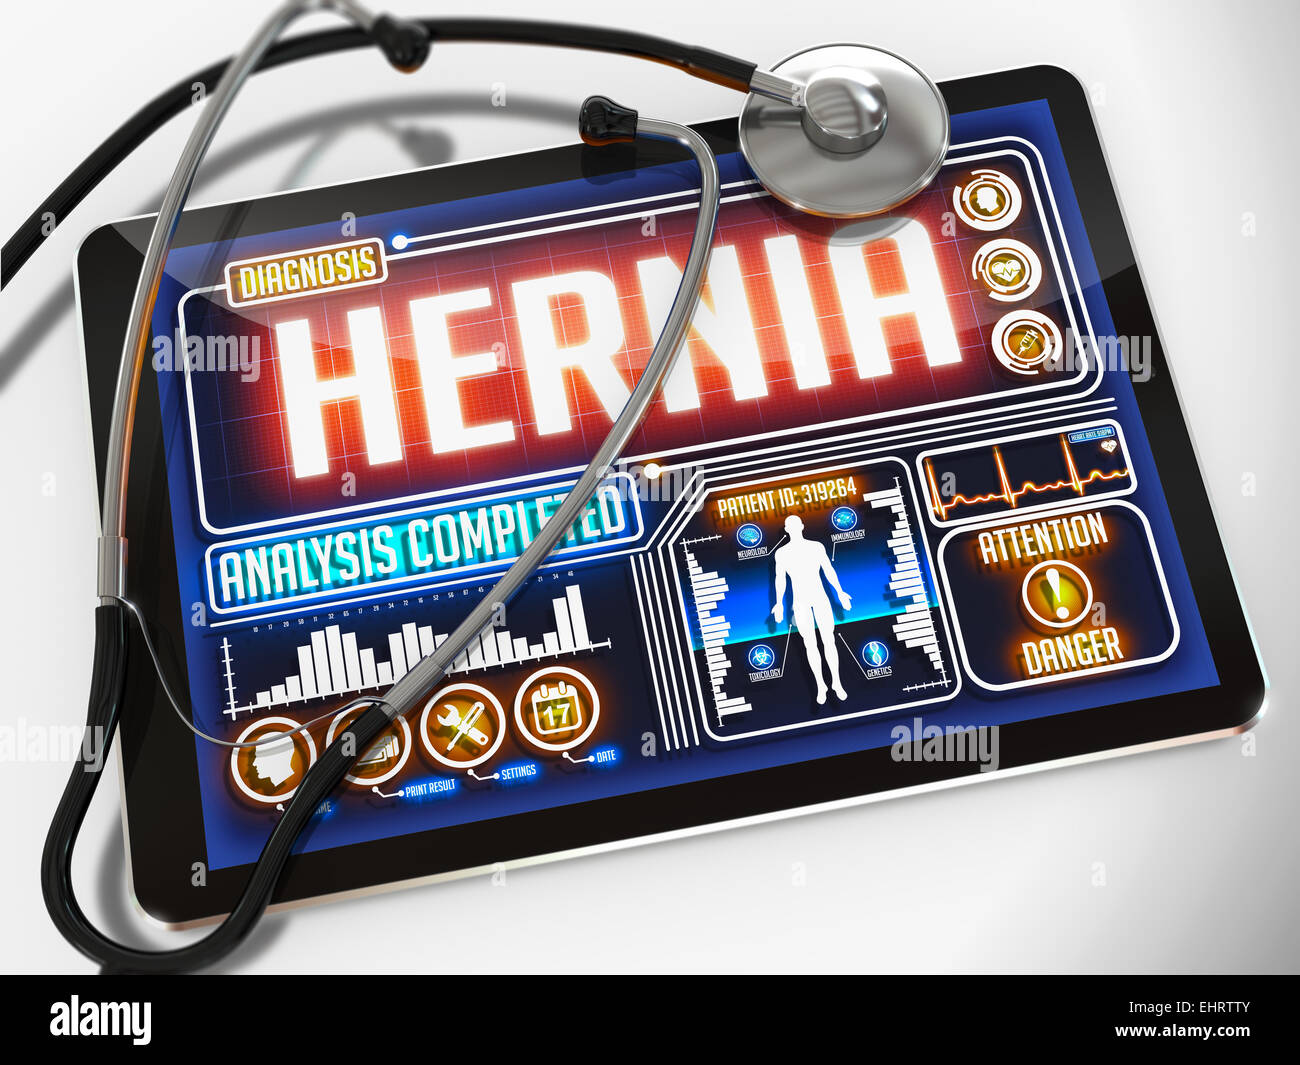 Hernia on the Display of Medical Tablet. Stock Photo